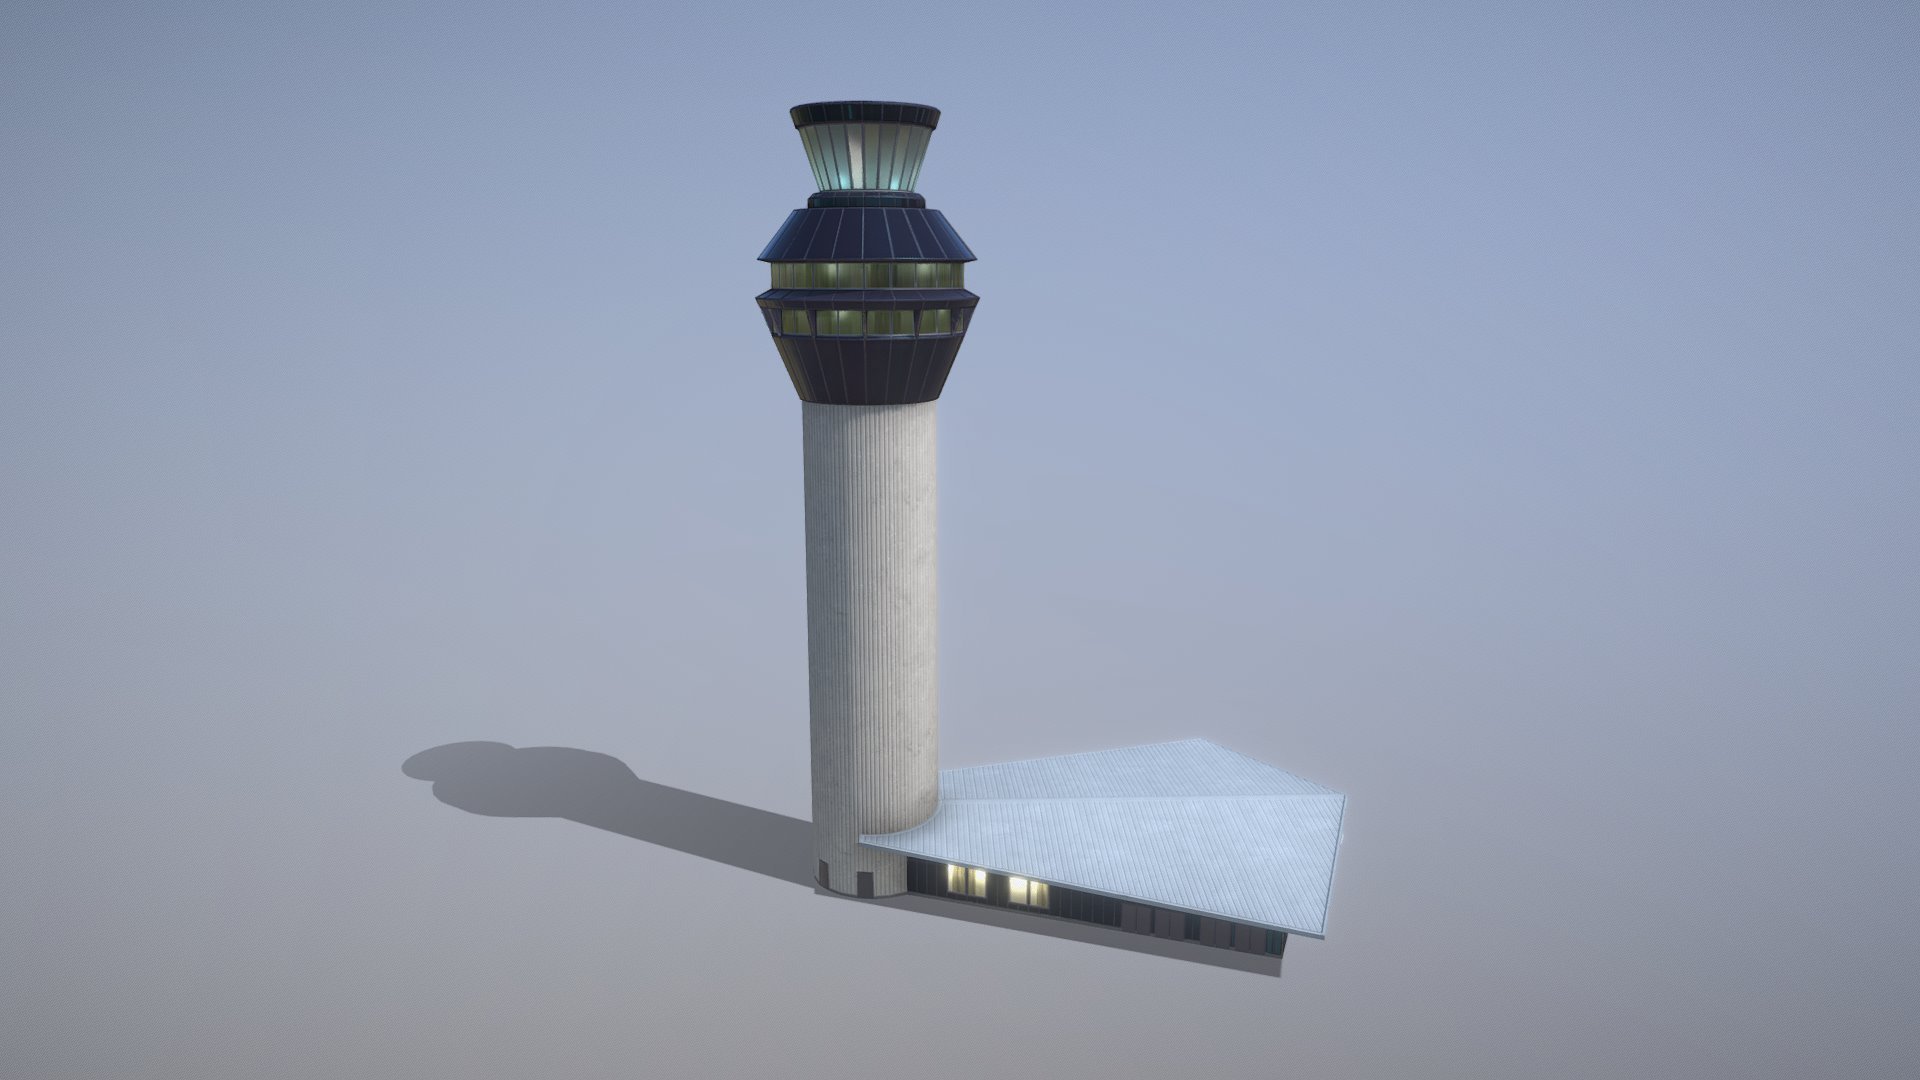 Airport Control Tower EGCC

LOD0 - (triangles 1382) / (points 774)
LOD1 - (triangles 792) / (points 468)
LOD2 - (triangles 428) / (points 225)
LOD3 - (triangles 149) / (points 93)

Low-poly 3D model Airport Control Tower




Textures for PBR shader (Albedo, Specular, Gloss, AmbietOcclusion, NormalMap, Emissive) they may be used with Unity3D, Unreal Engine. size 4096x4096 

Textures for SUMMER and WINTER  

Textures for NIGHT 

Contains LODs 

All pictures (previews) REALTIME rendering 

Textures: 


Pack for summer. 

EGCC_Control_Tower_Albedo.png - 4096x4096

EGCC_Control_Tower_AmbientOcclusion.png - 4096x4096

EGCC_Control_Tower_NormalMap.png - 4096x4096

EGCC_Control_Tower_Gloss.png - 4096x4096

EGCC_Control_Tower_Specular.png - 4096x4096

EGCC_Control_Tower_Emission.png - 4096x4096 (Night)



Pack for winter.      



If you have questions about my models or need any kind of help, feel free to contact me and i'll do my best to help you 3d model